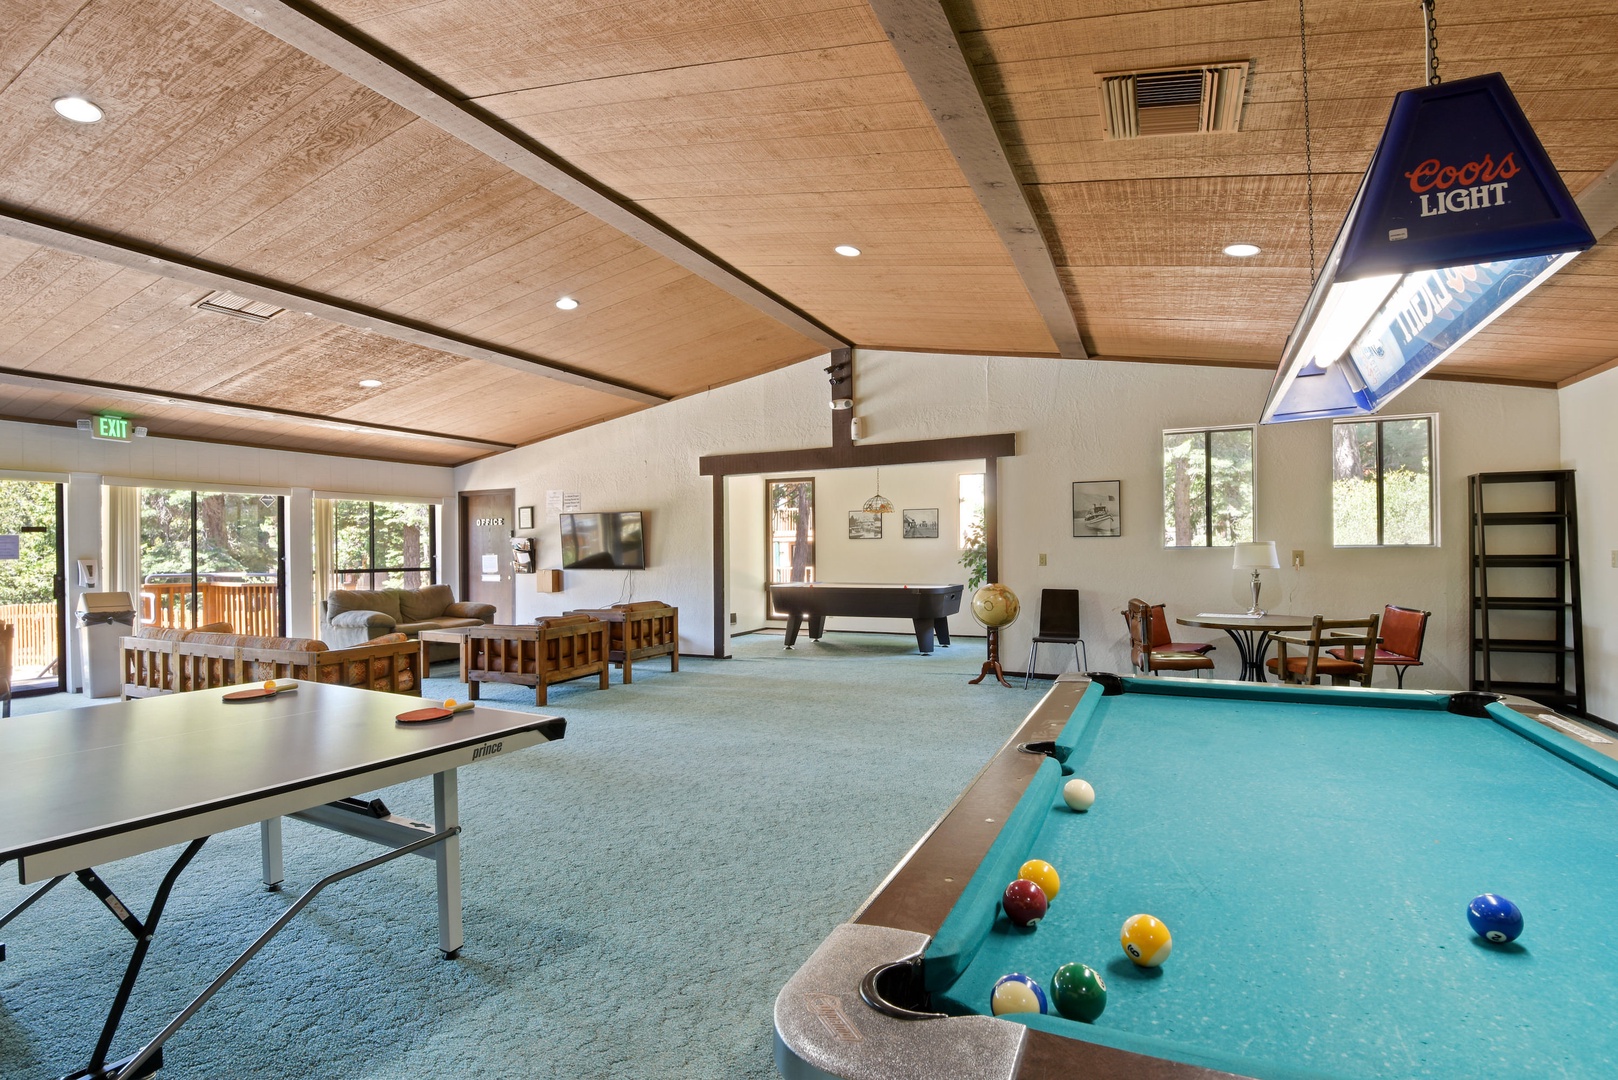 Condo clubhouse with pool table and ping pong table